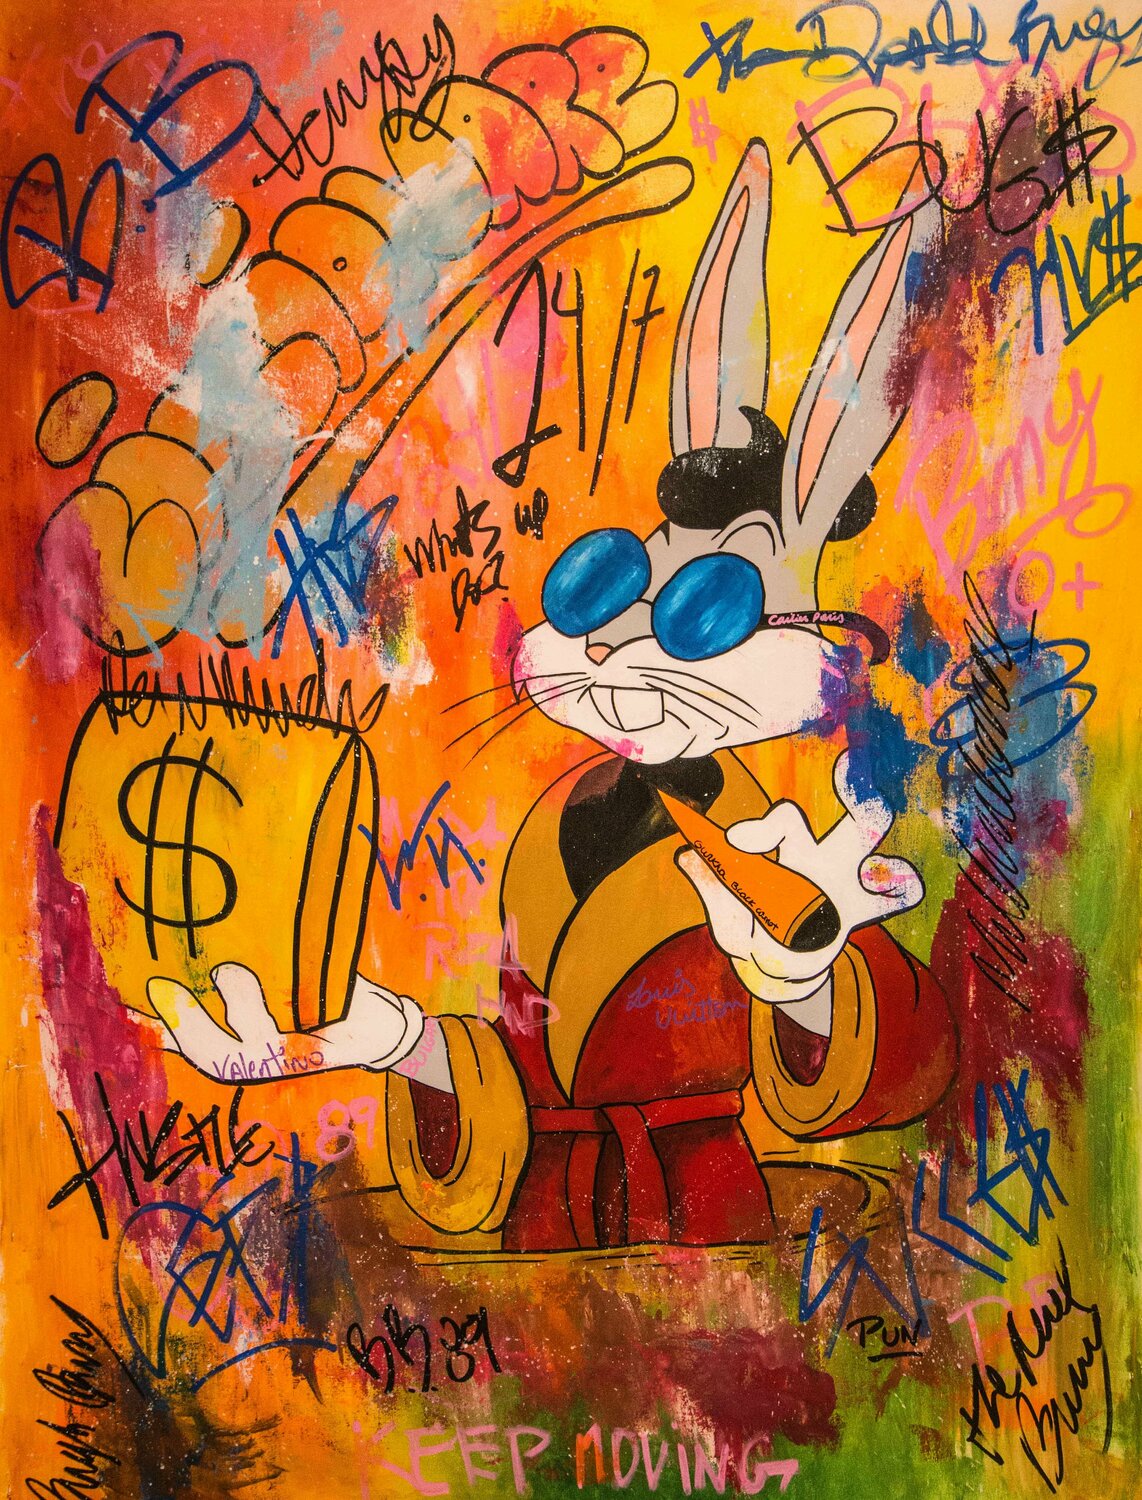 Carrot Dealer ft. Bugs Bunny by Carlos Pun (2020) : Painting Acrylic on ...